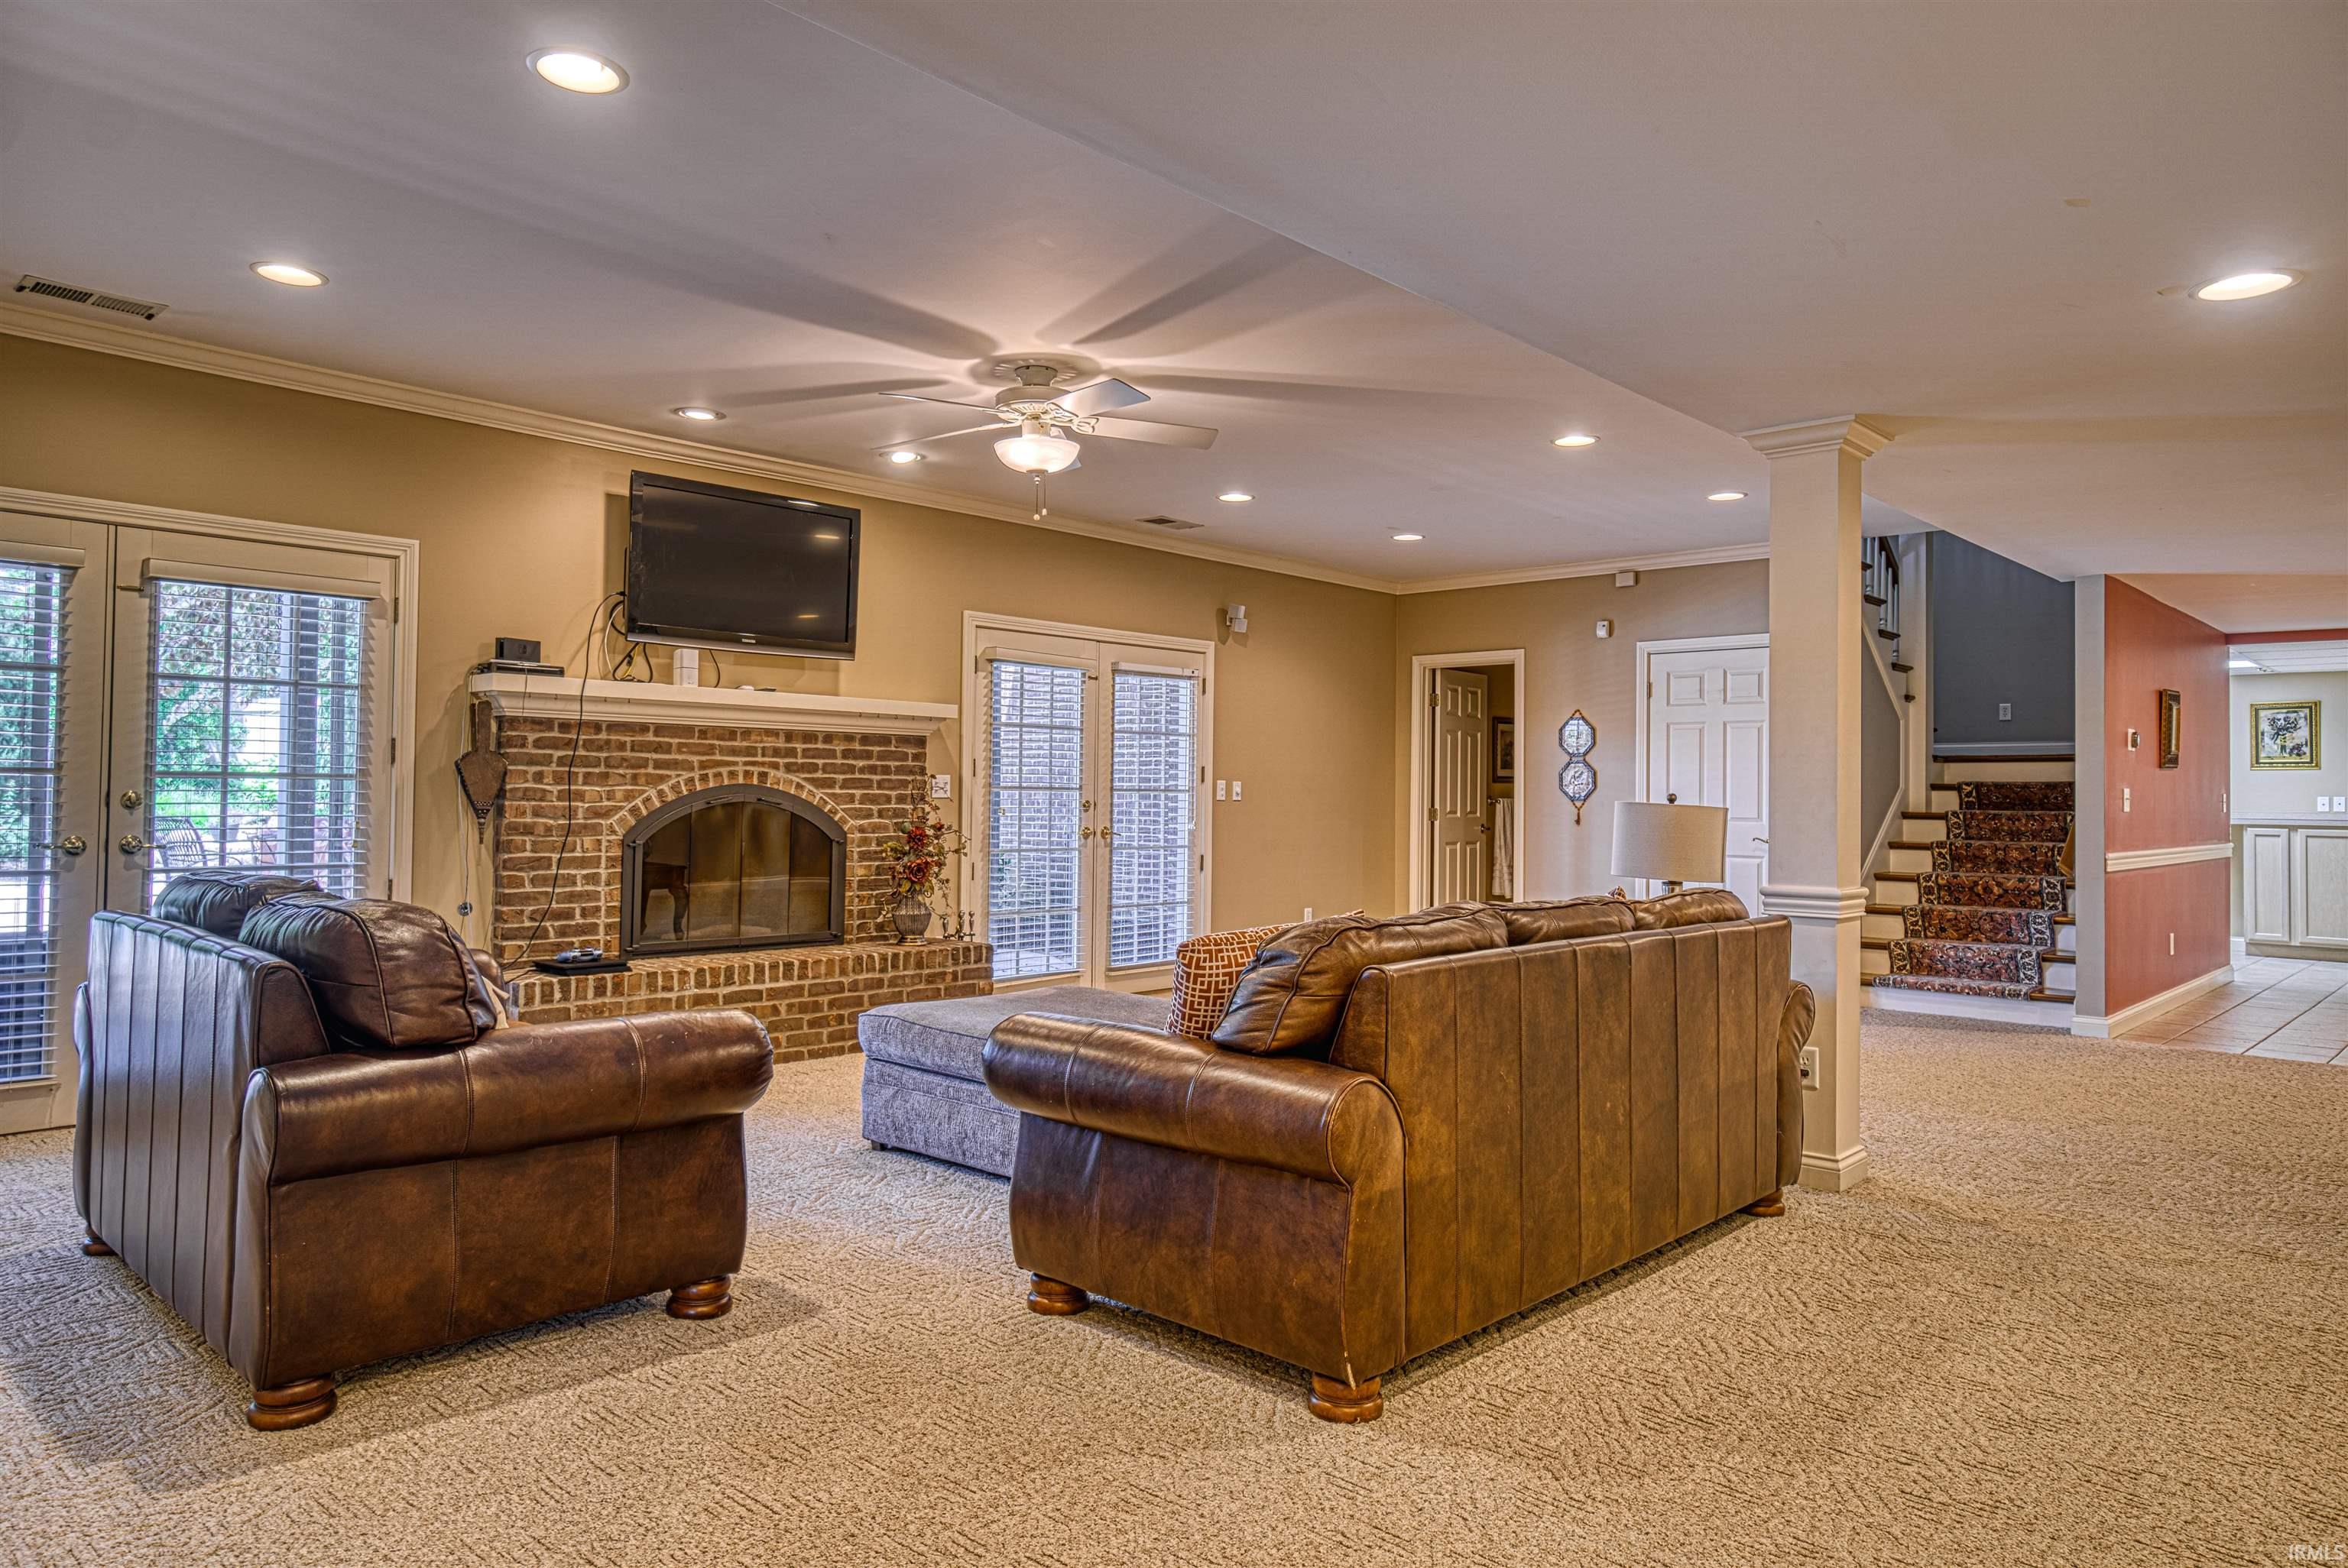 Living area with wood burning fireplace, full bathroom and pool access